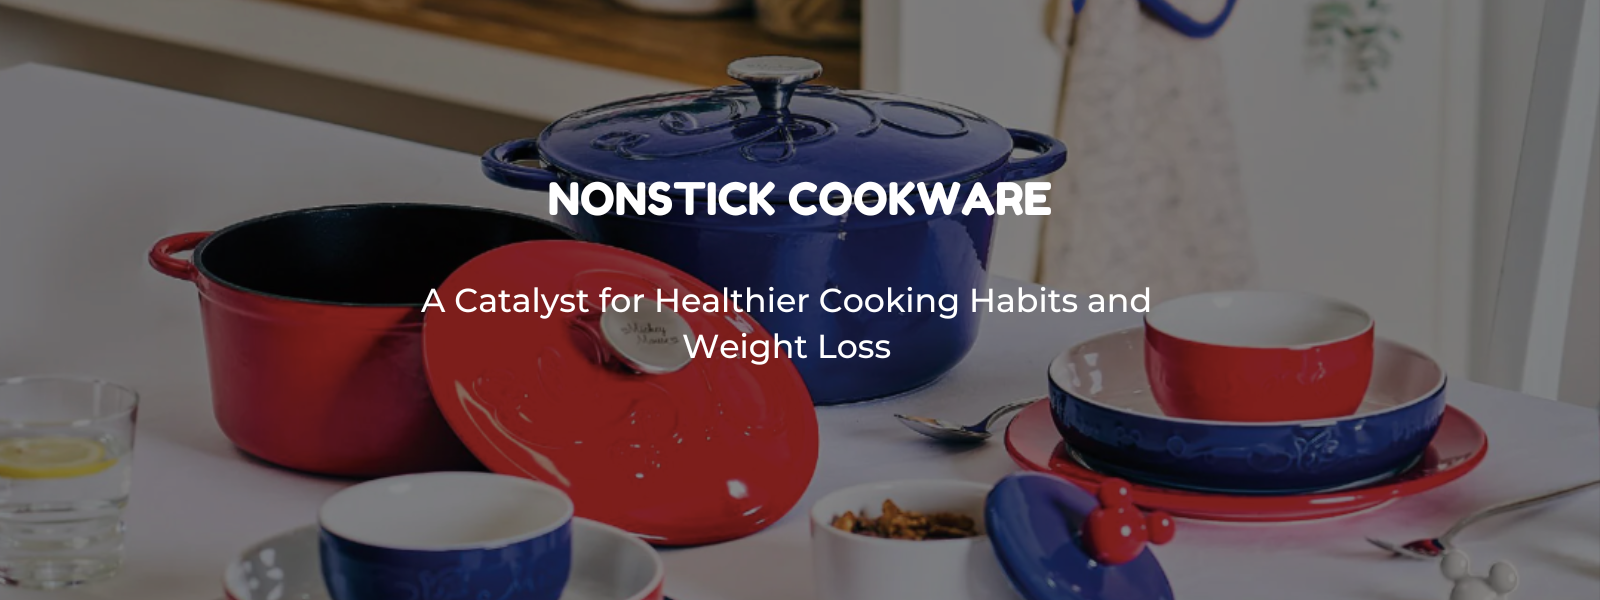 Nonstick Cookware: A Catalyst for Healthier Cooking Habits and Weight Loss